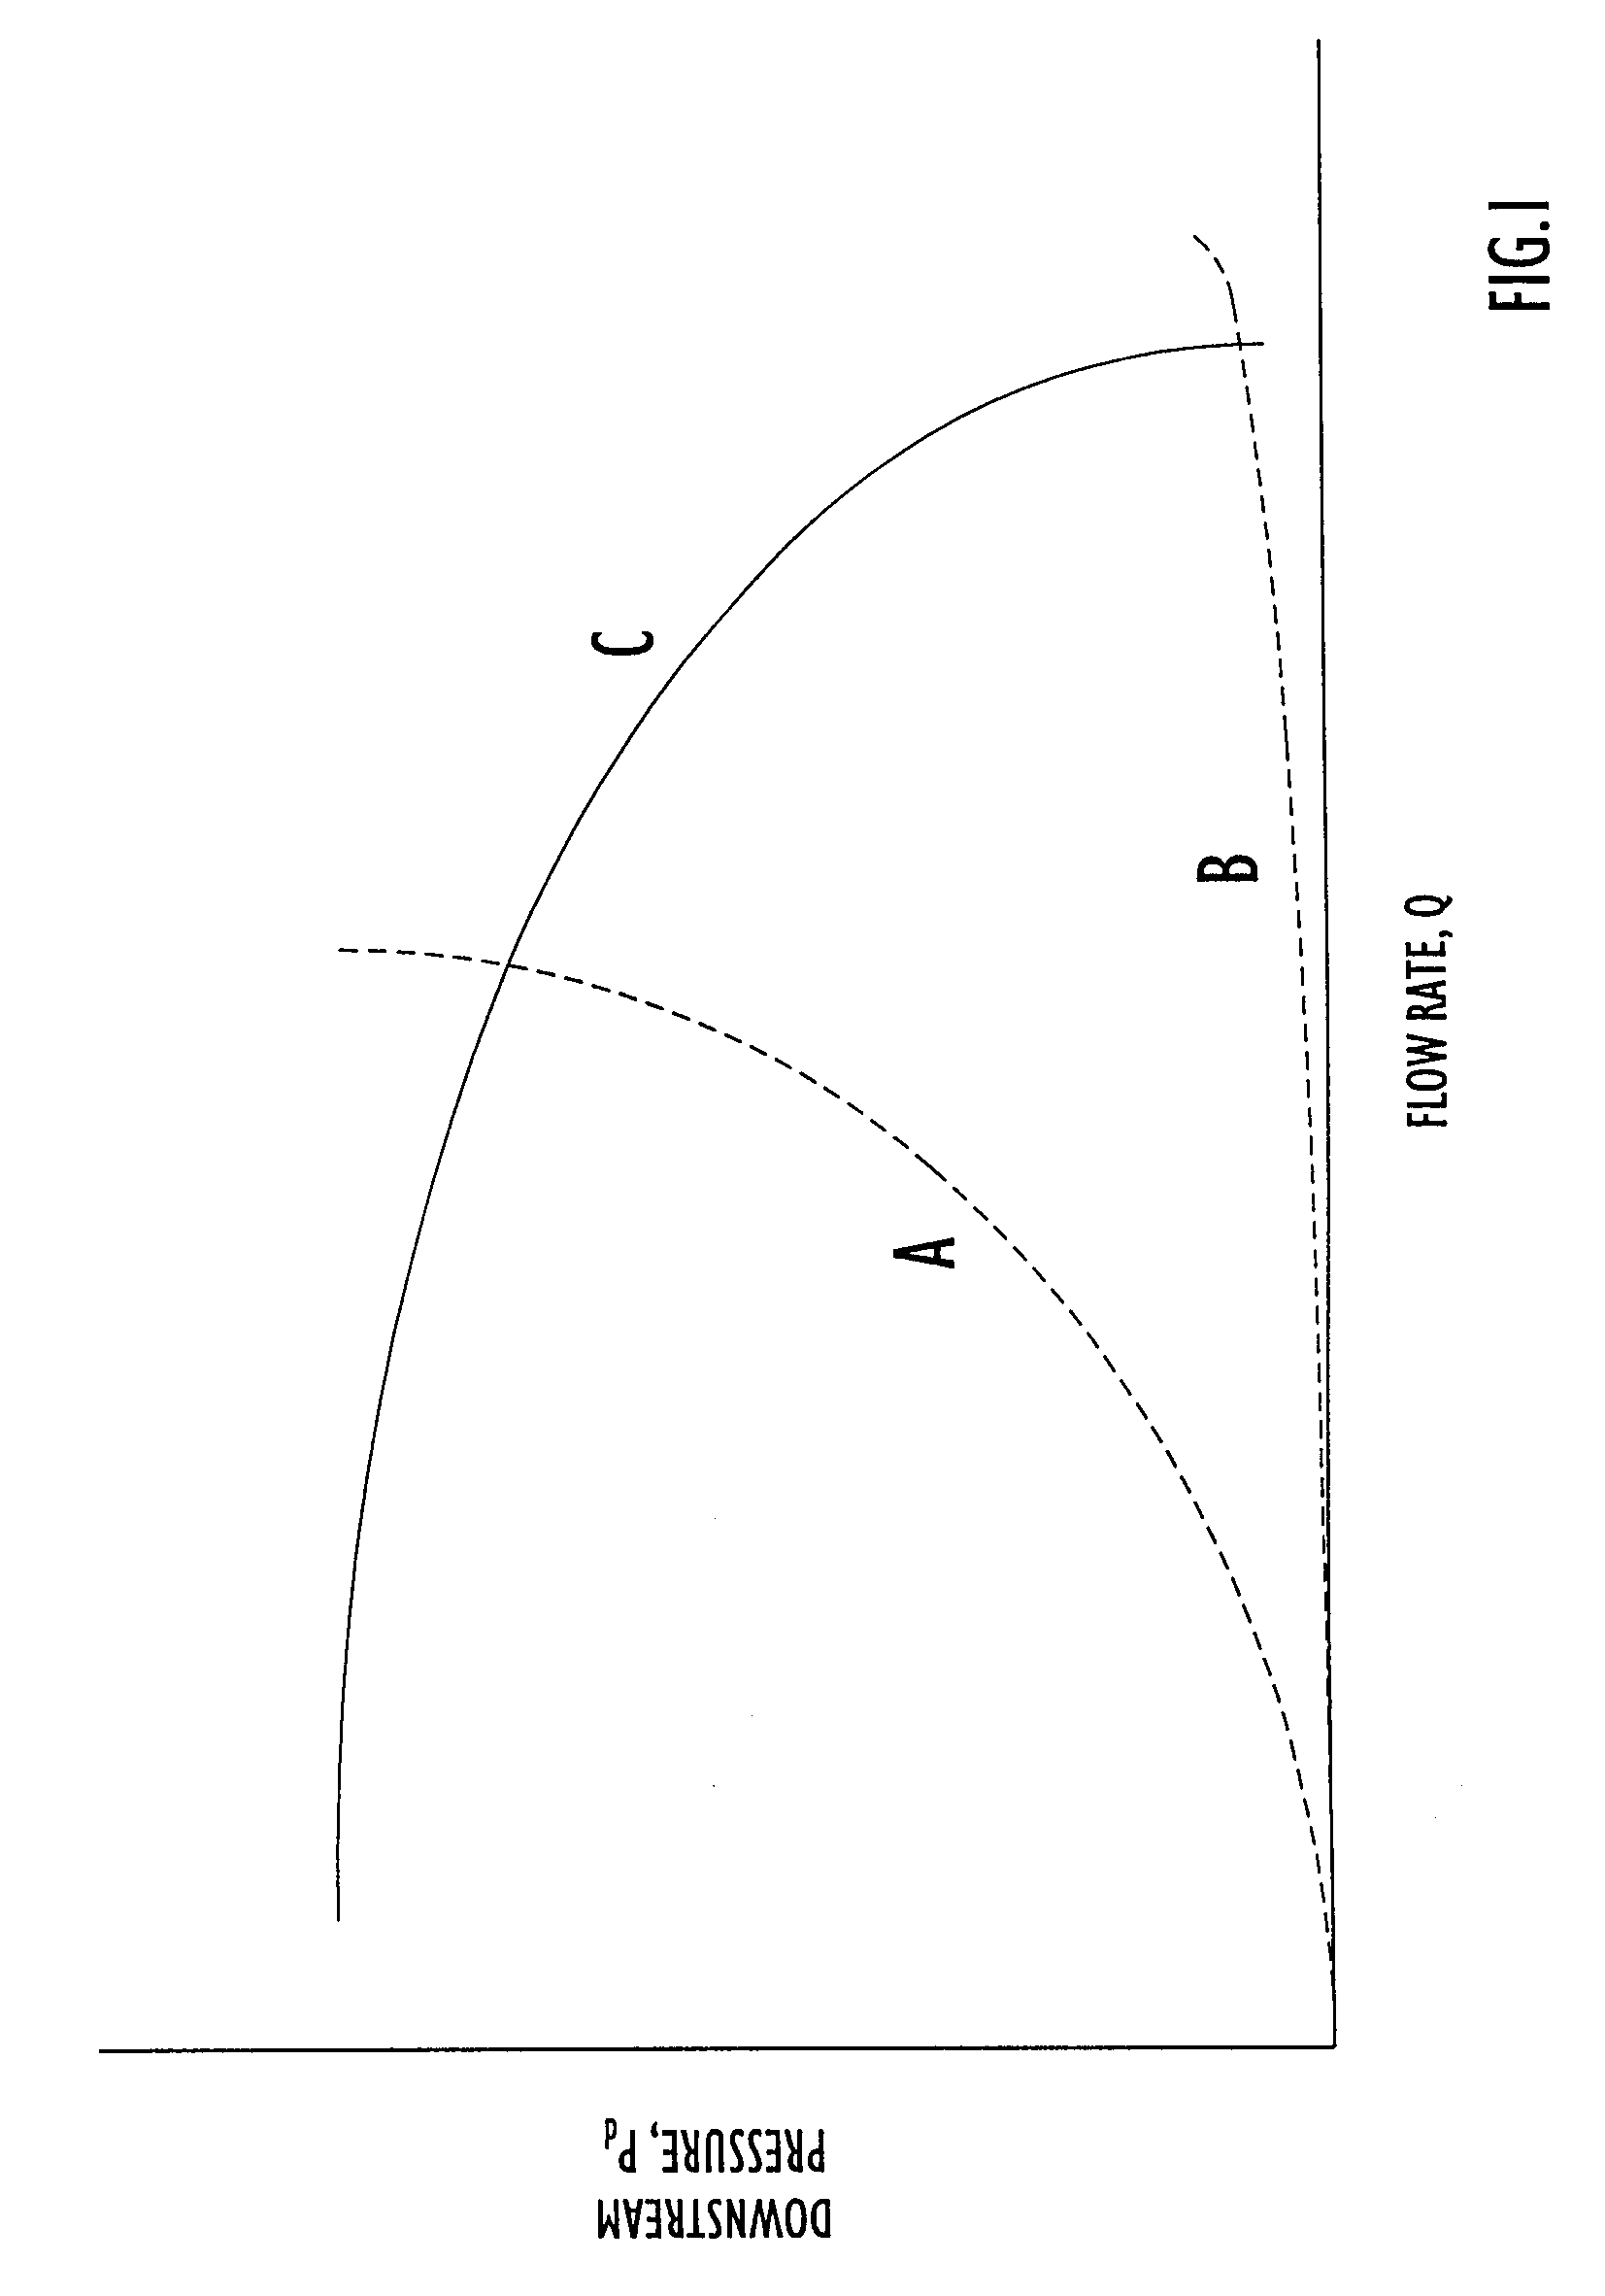 Method and apparatus for detecting and isolating a rupture in fluid distribution system